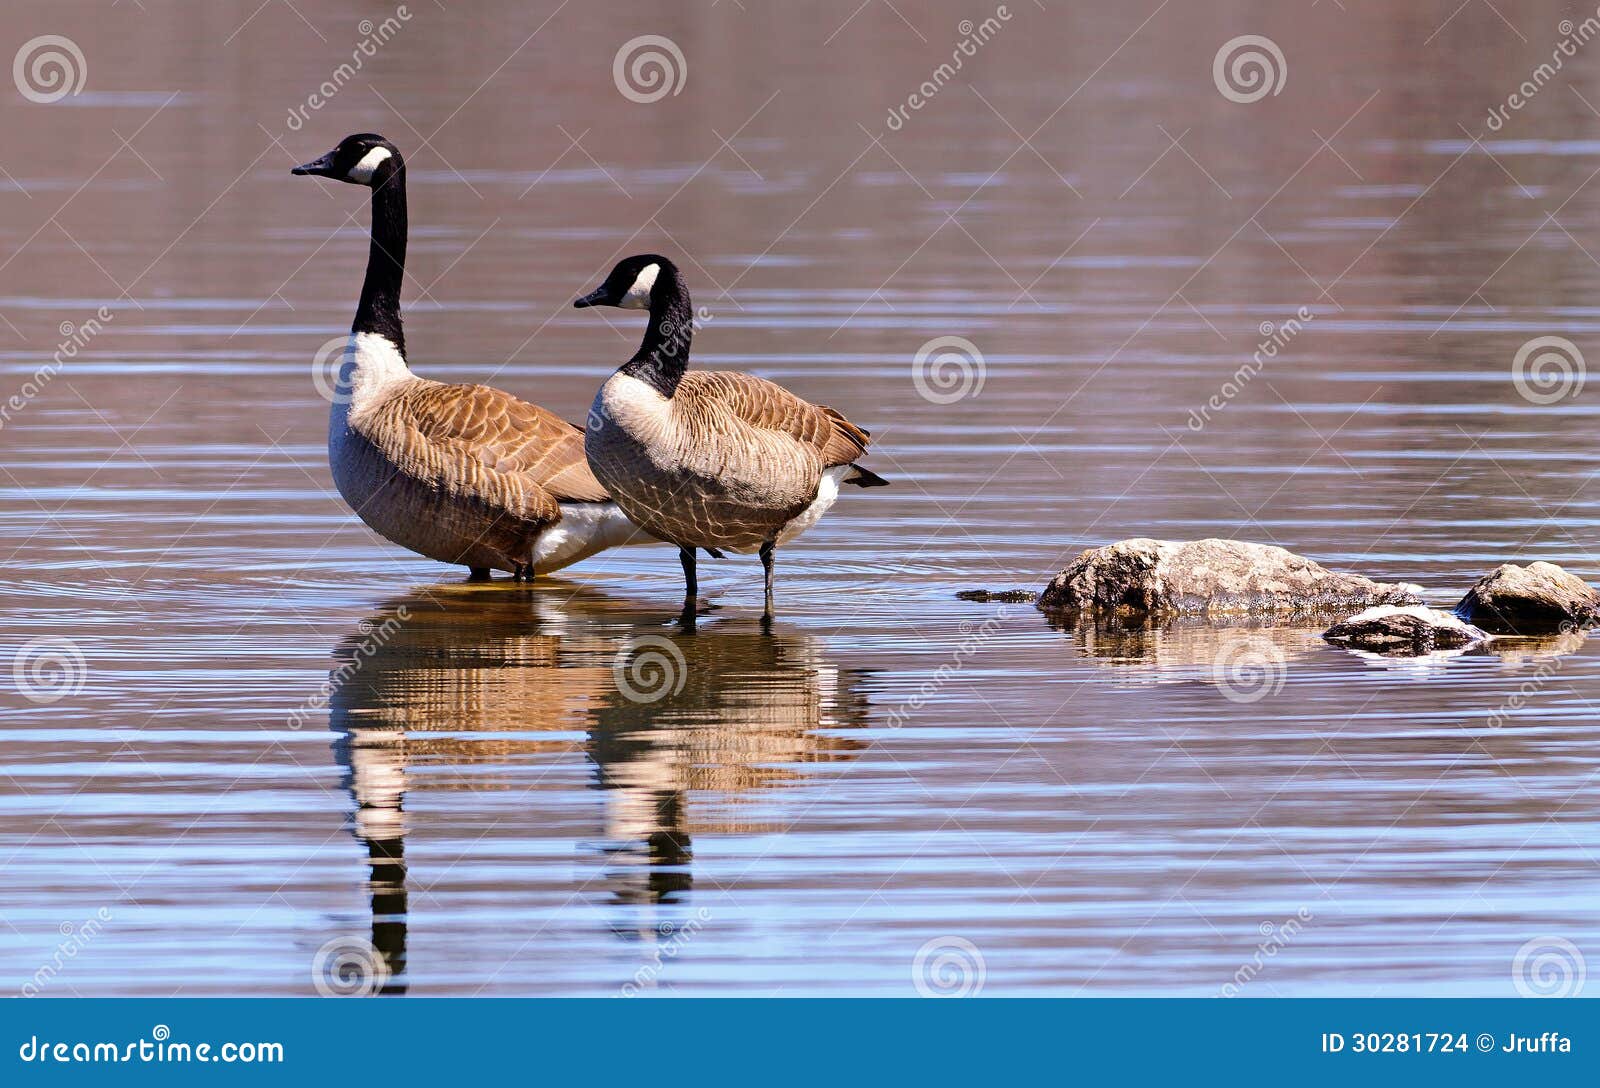 canadian geese wading in a lake